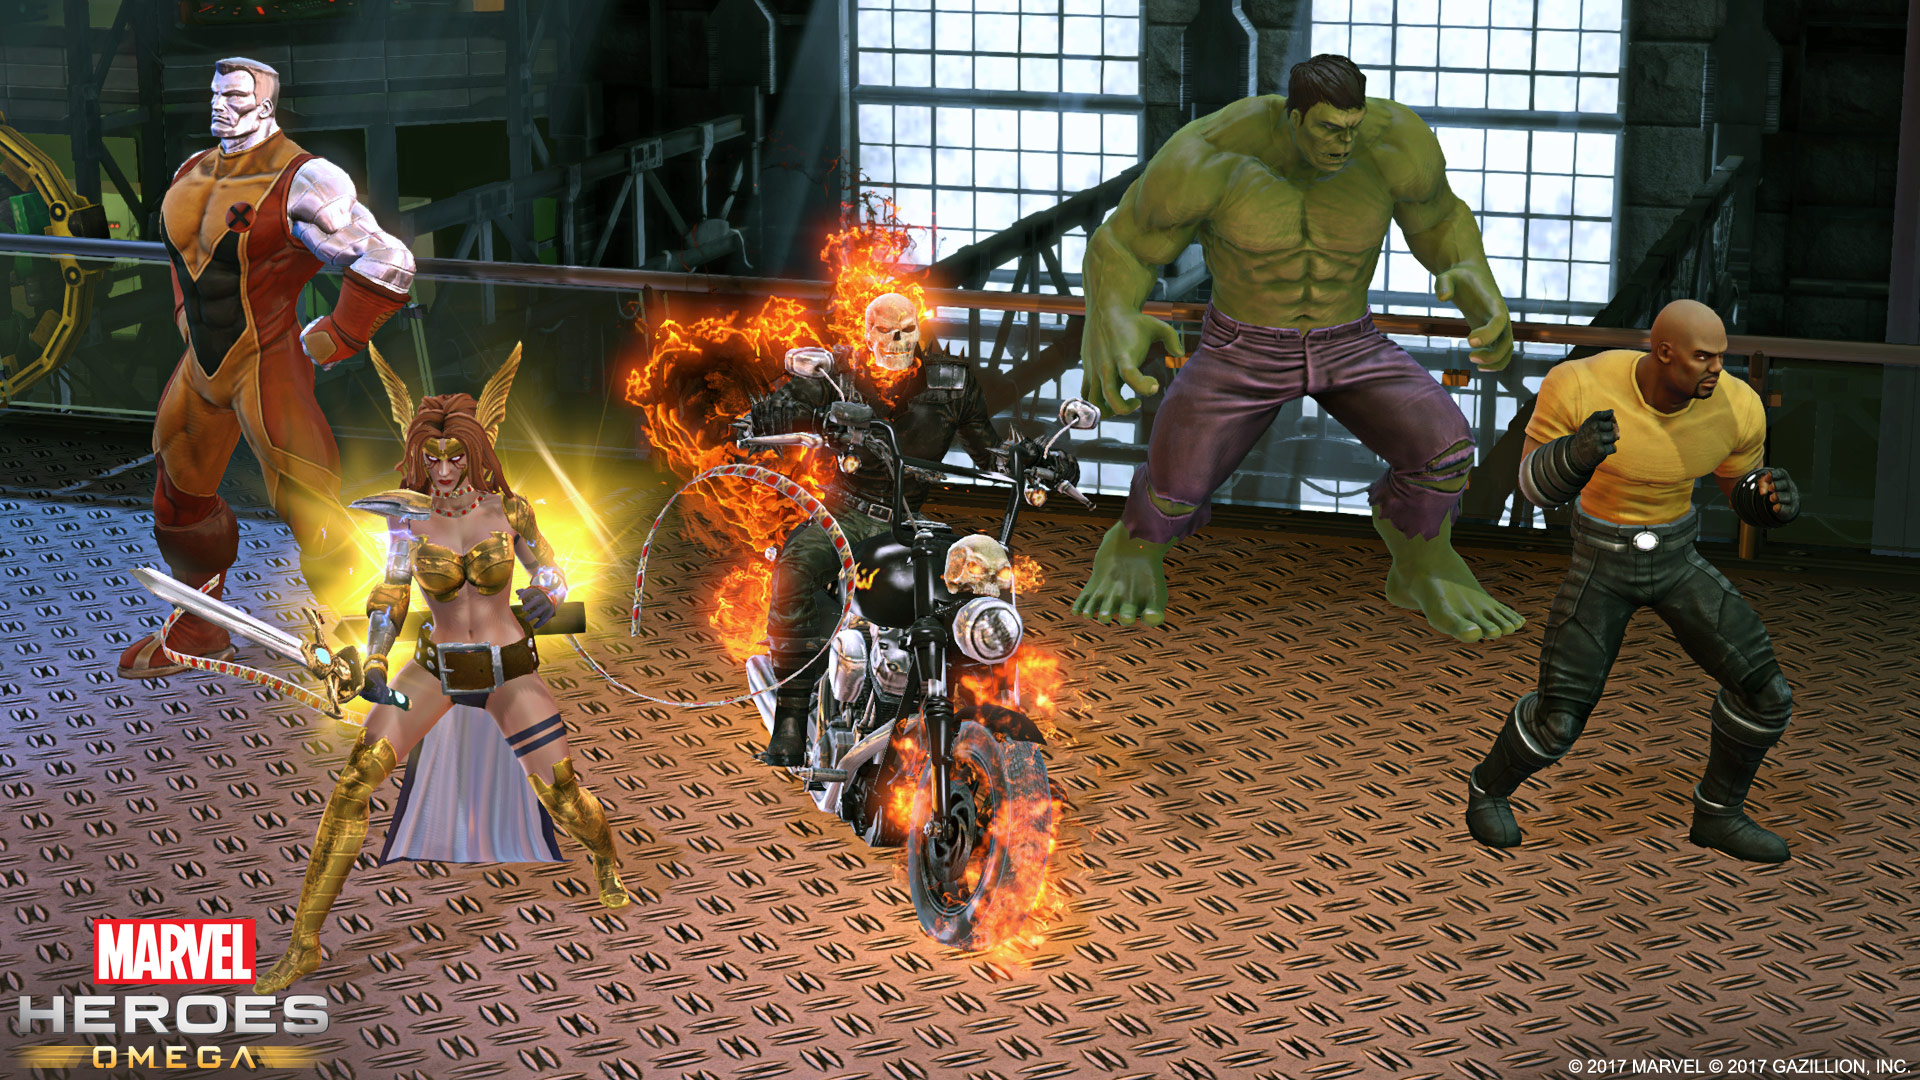 Free To Play Action Rpg Marvel Heroes Omega Coming This Spring To Xbox One Xbox Wire - heroes beta 2.0 roblox